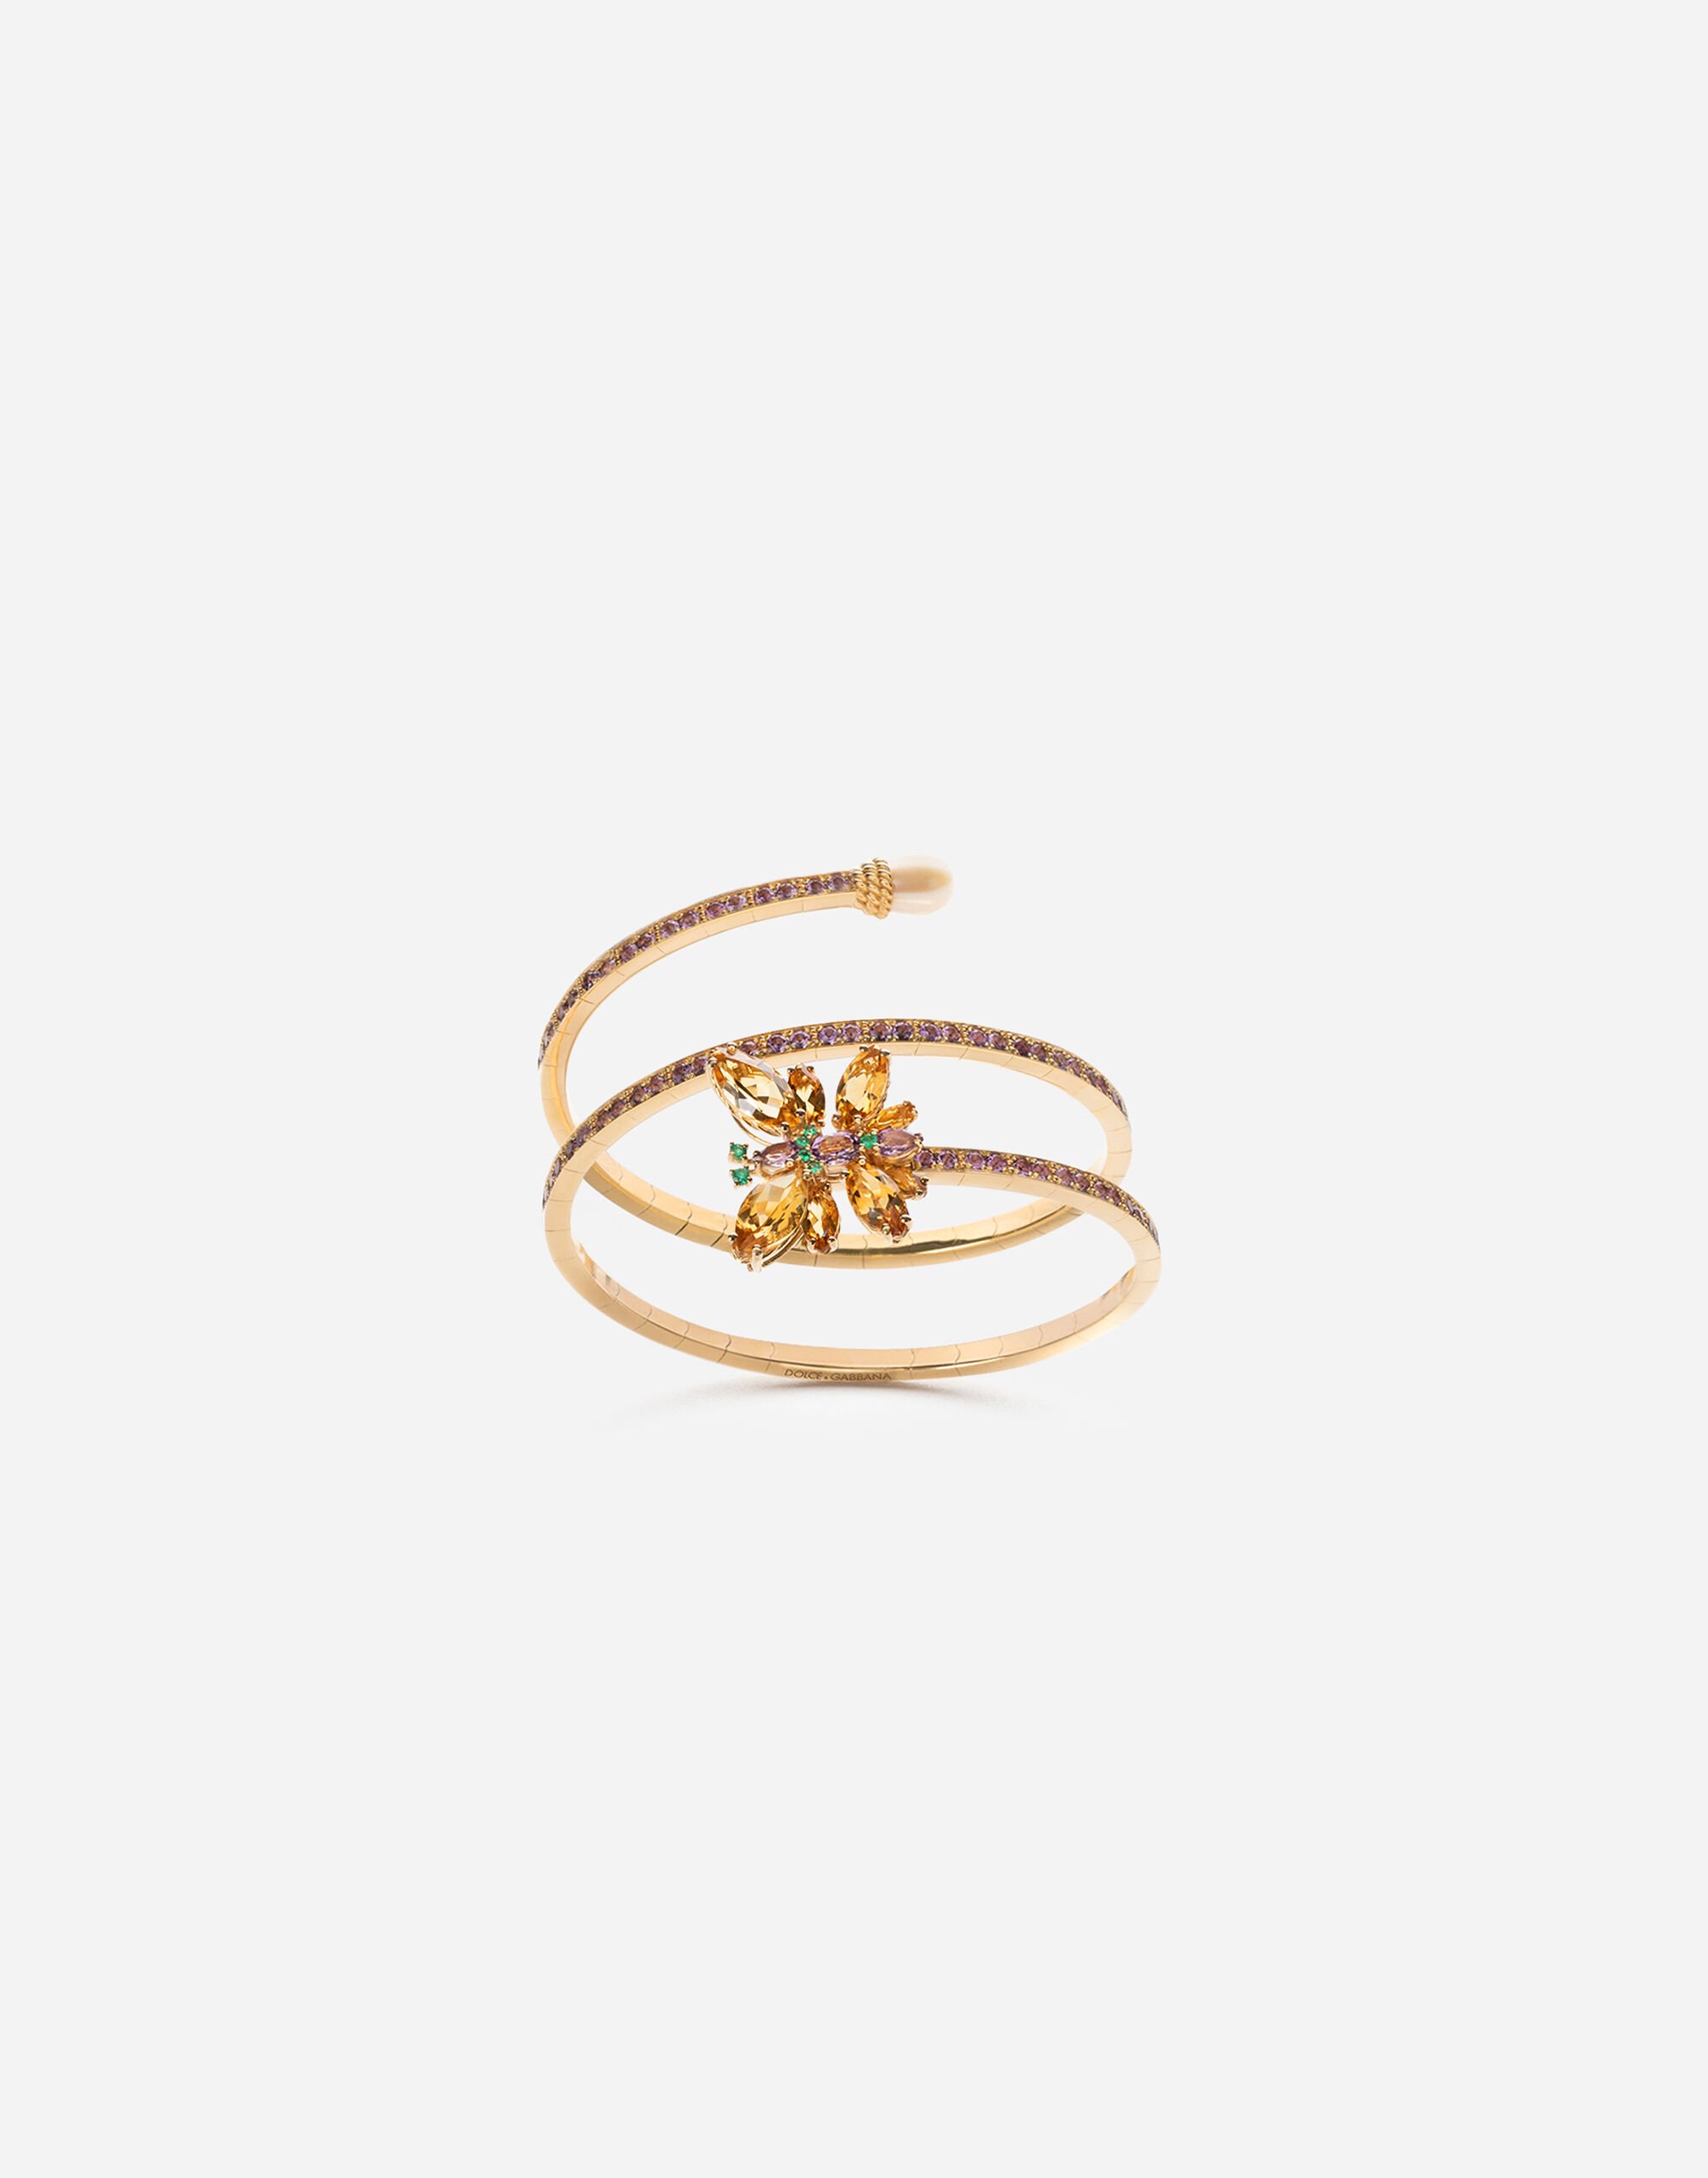 ${brand} Spring yellow gold bracelet with butterfly-shaped settings ${colorDescription} ${masterID}